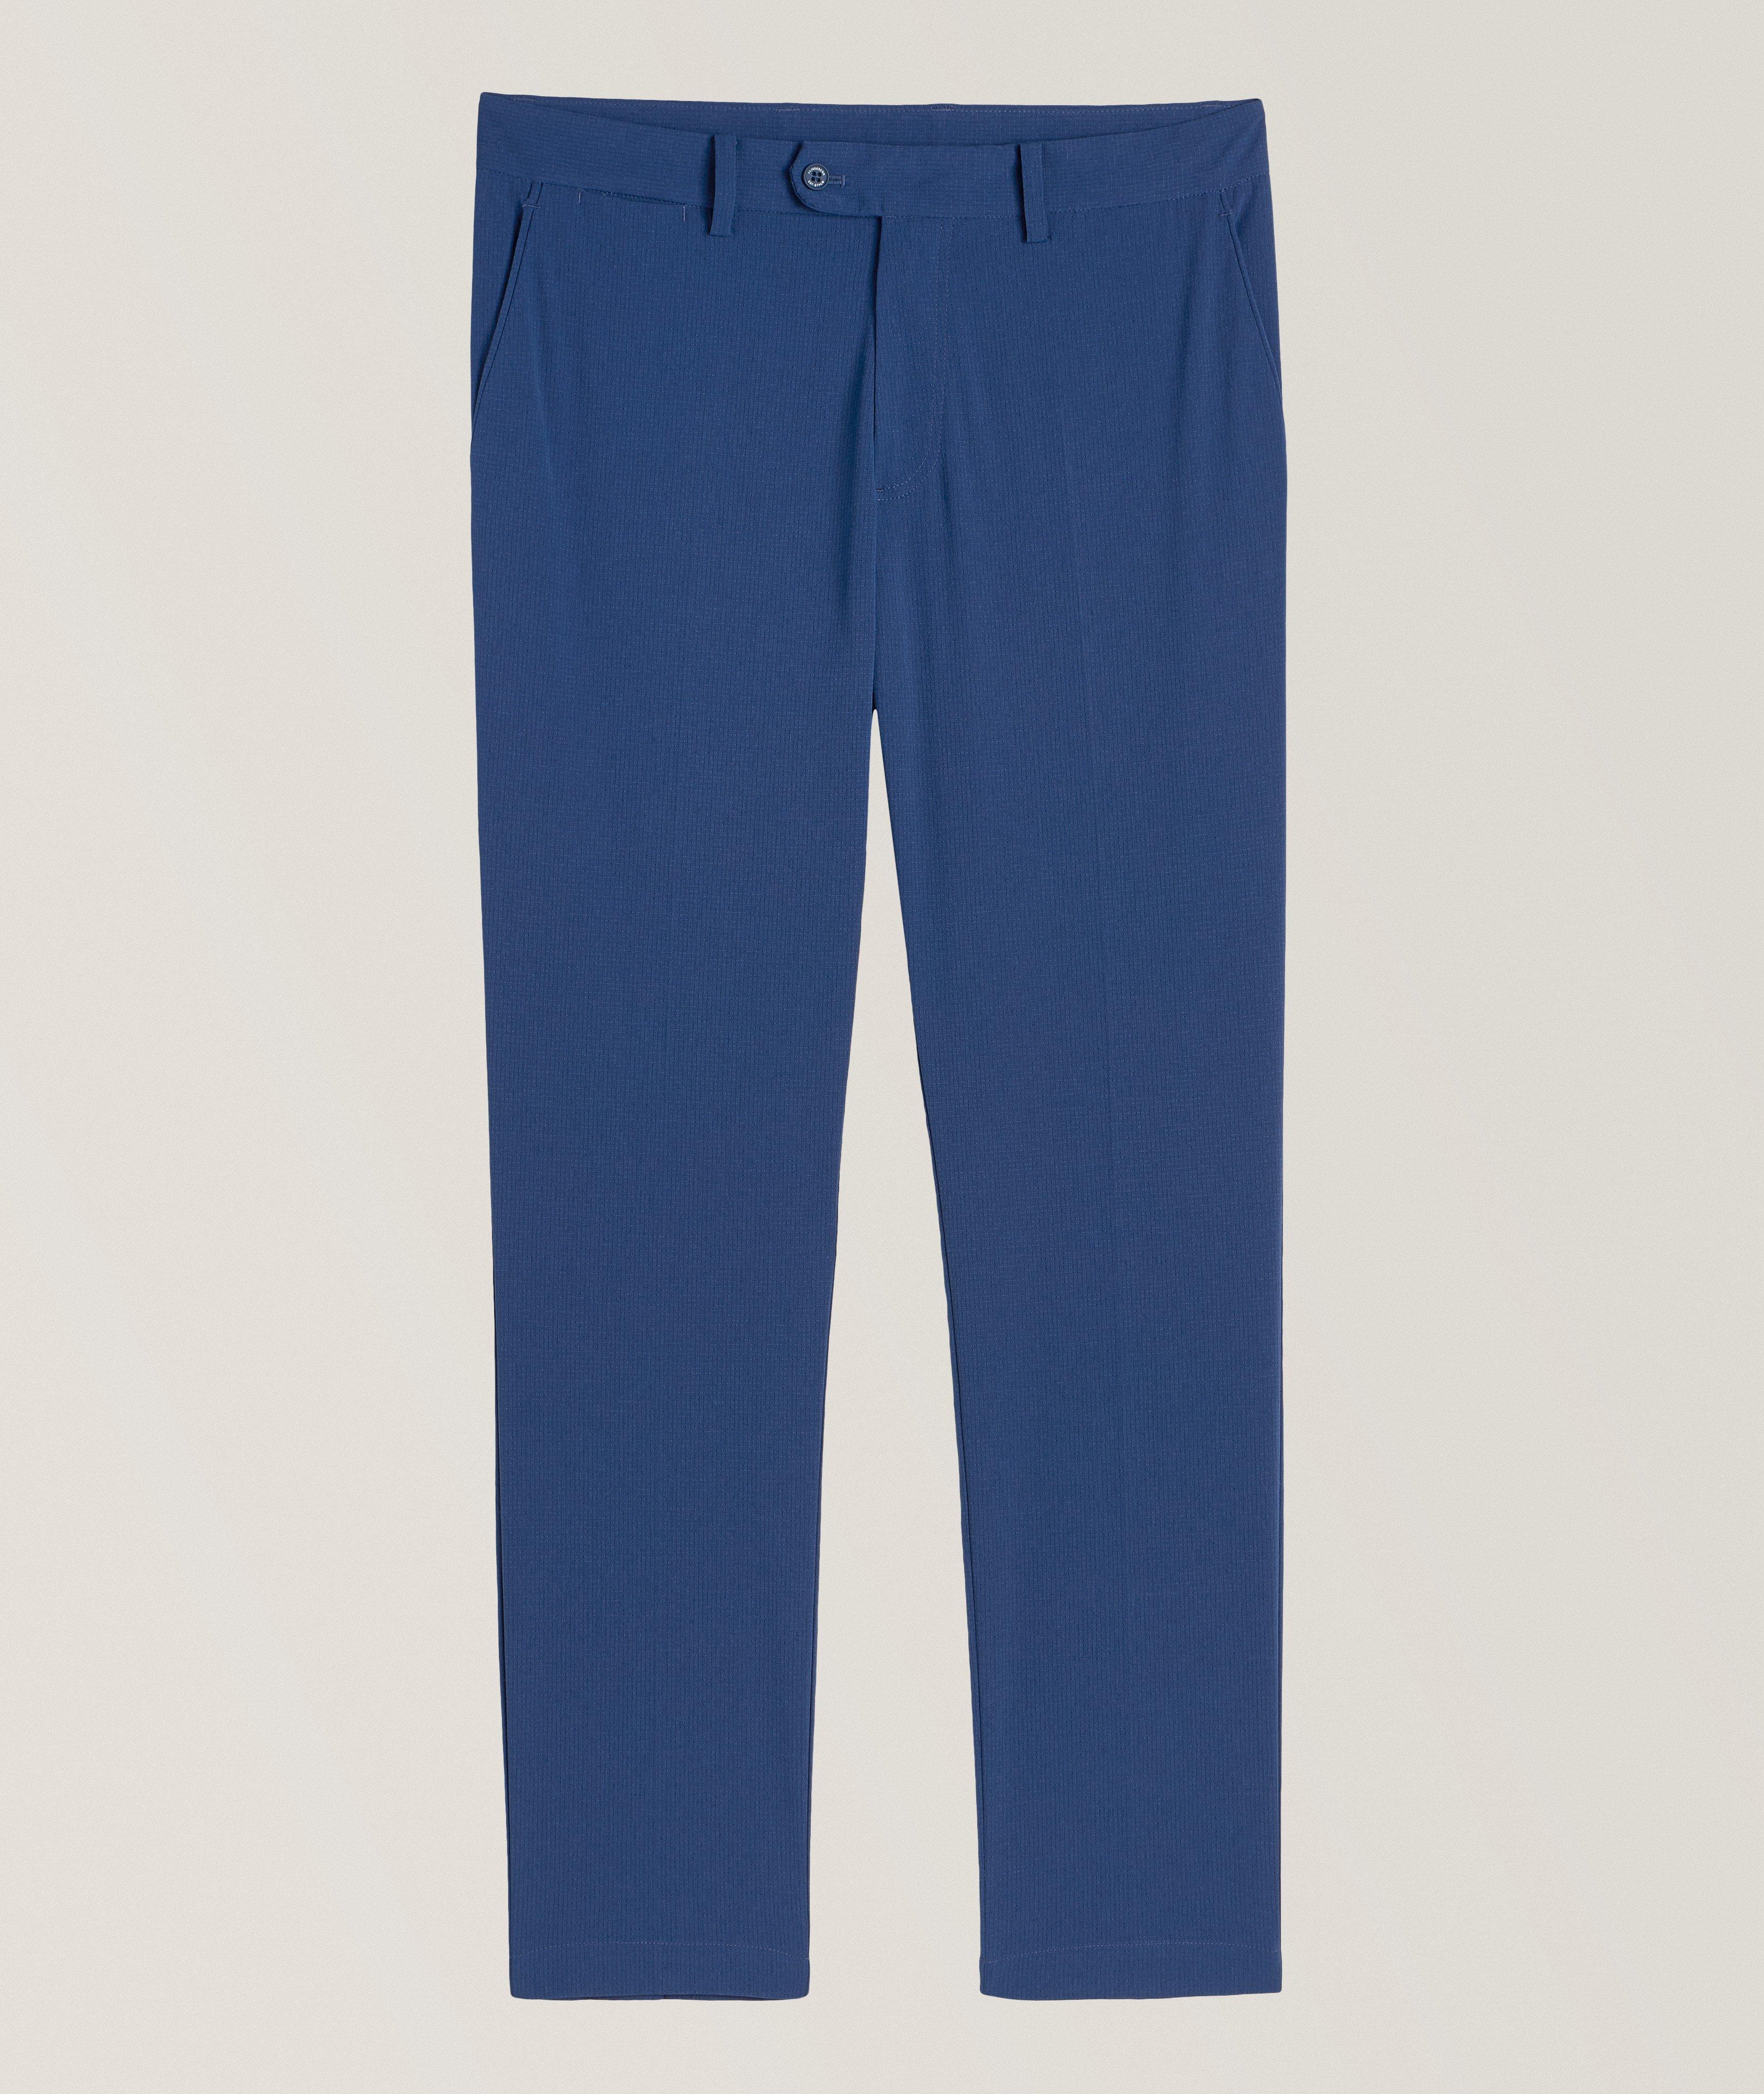 Vent 4-Way Stretch Trousers image 0